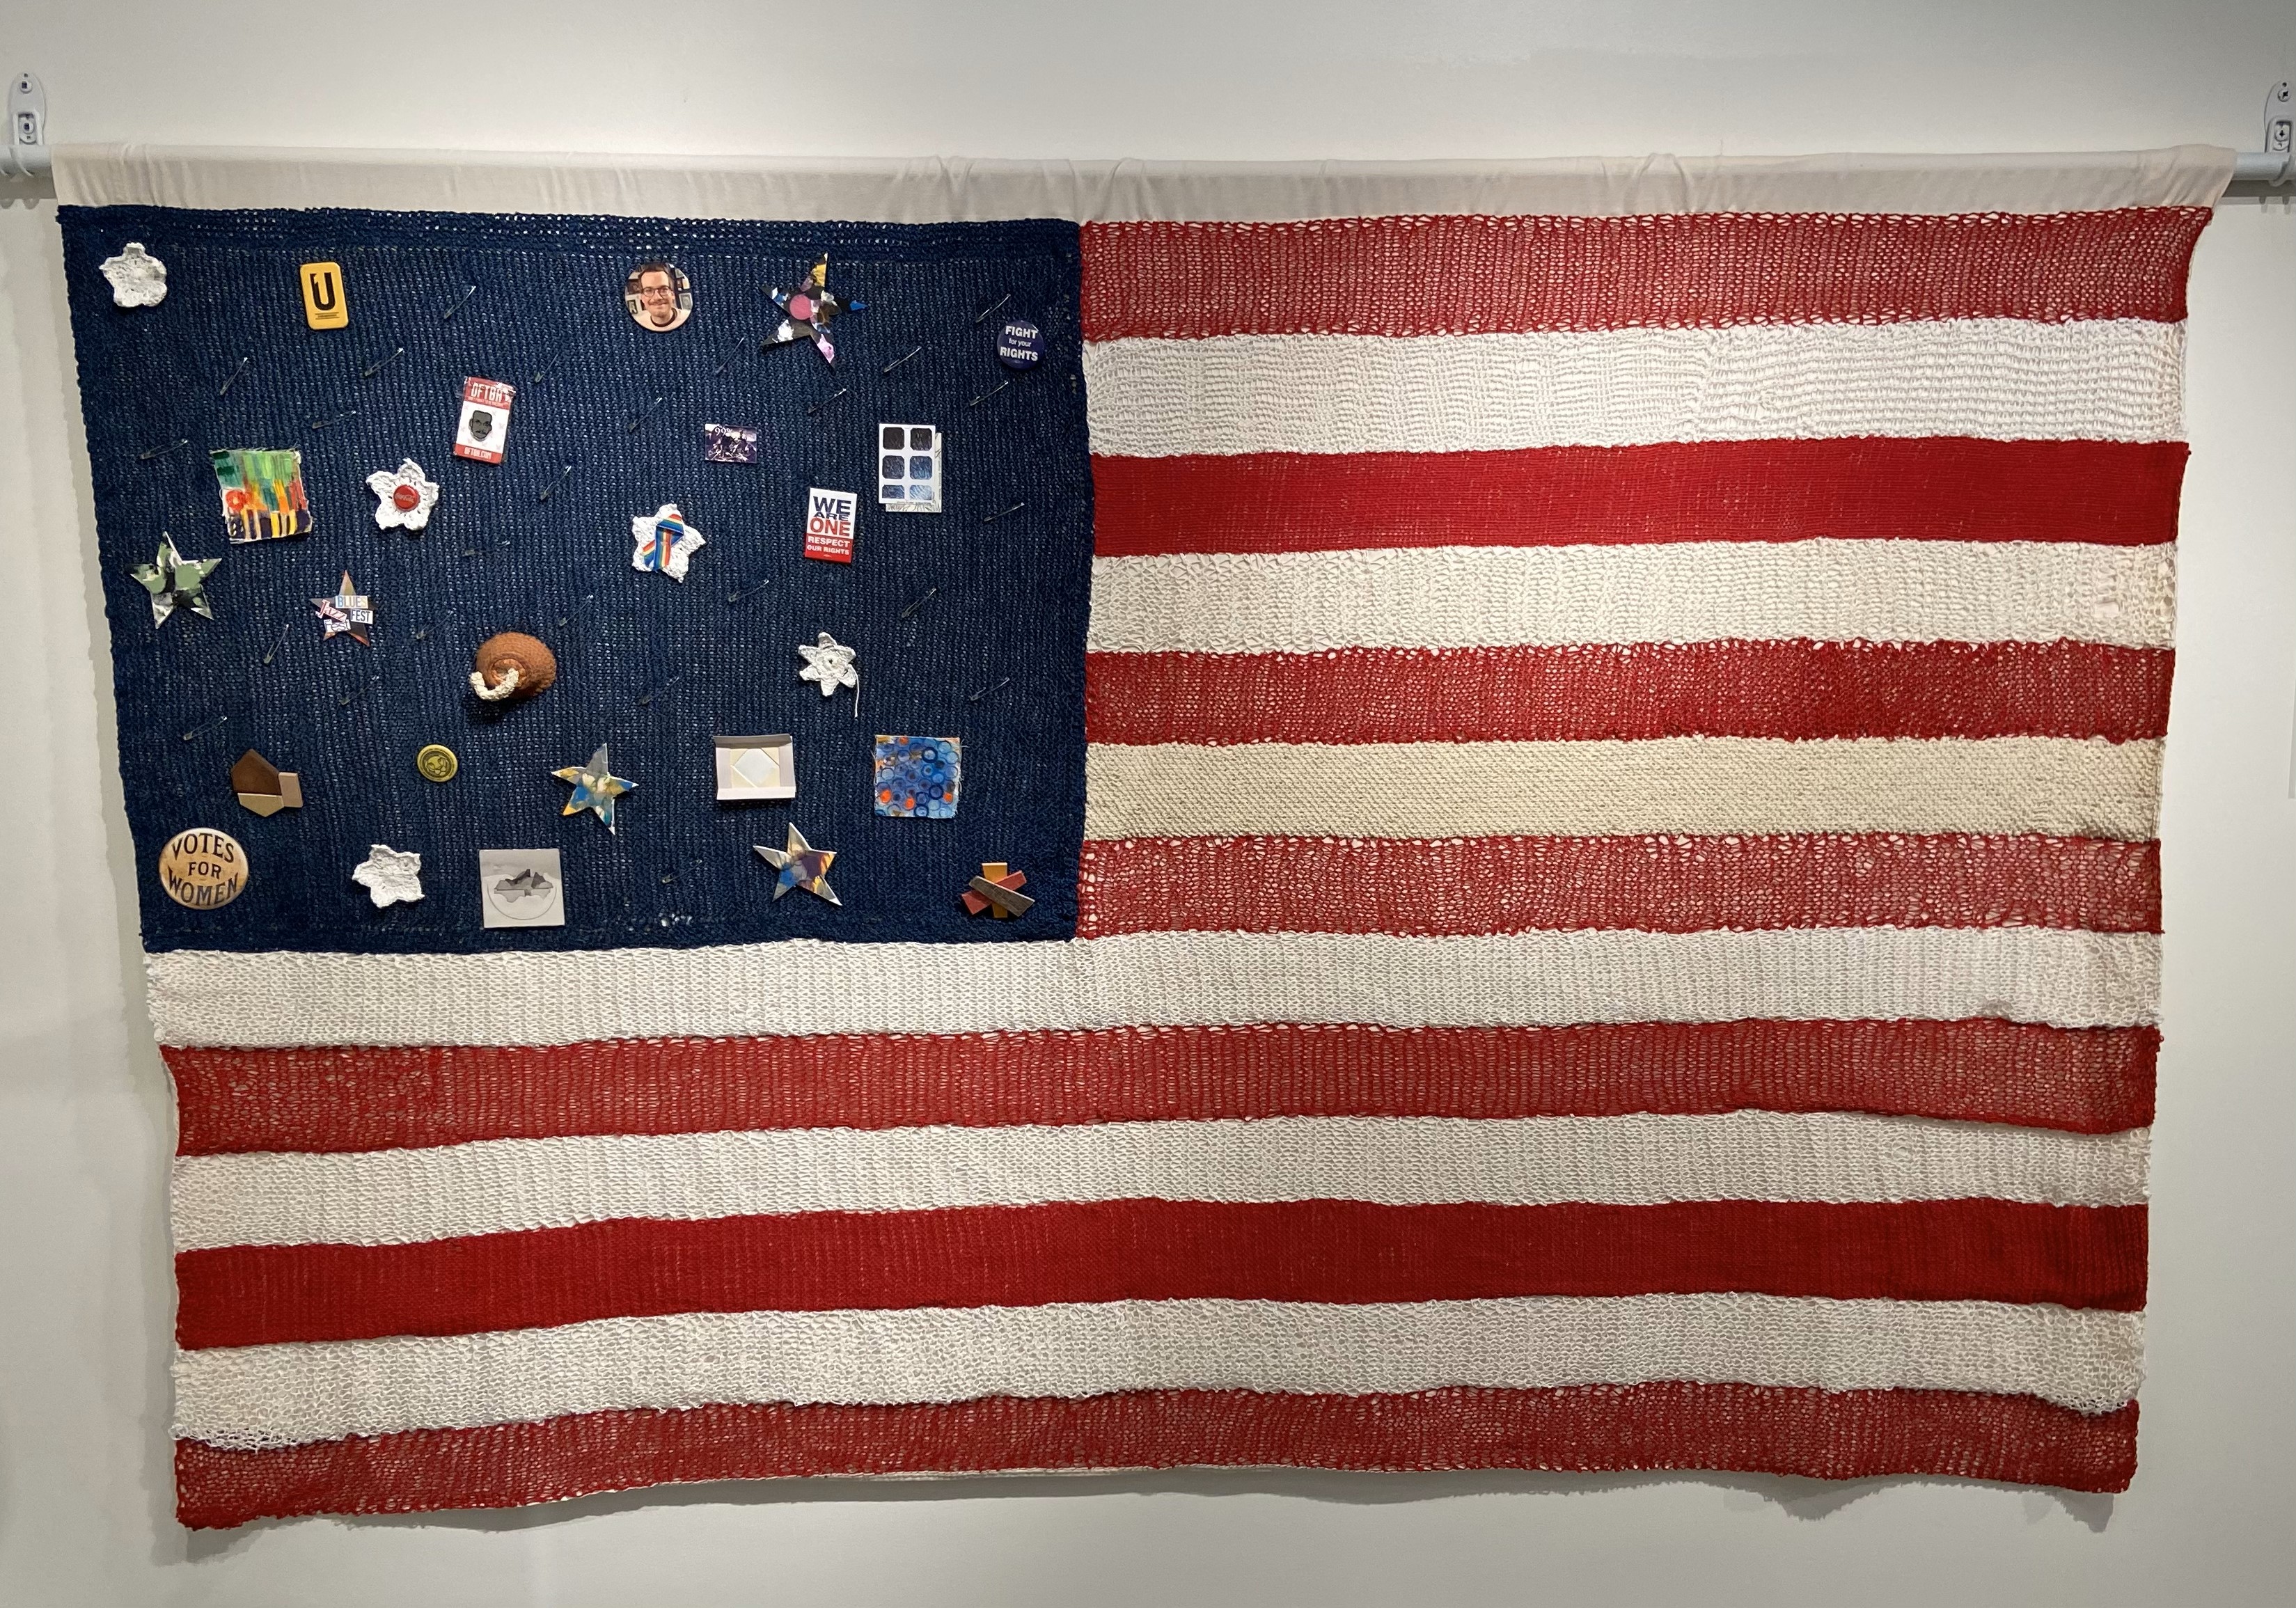 Collaborative Flag - Home of the Brave